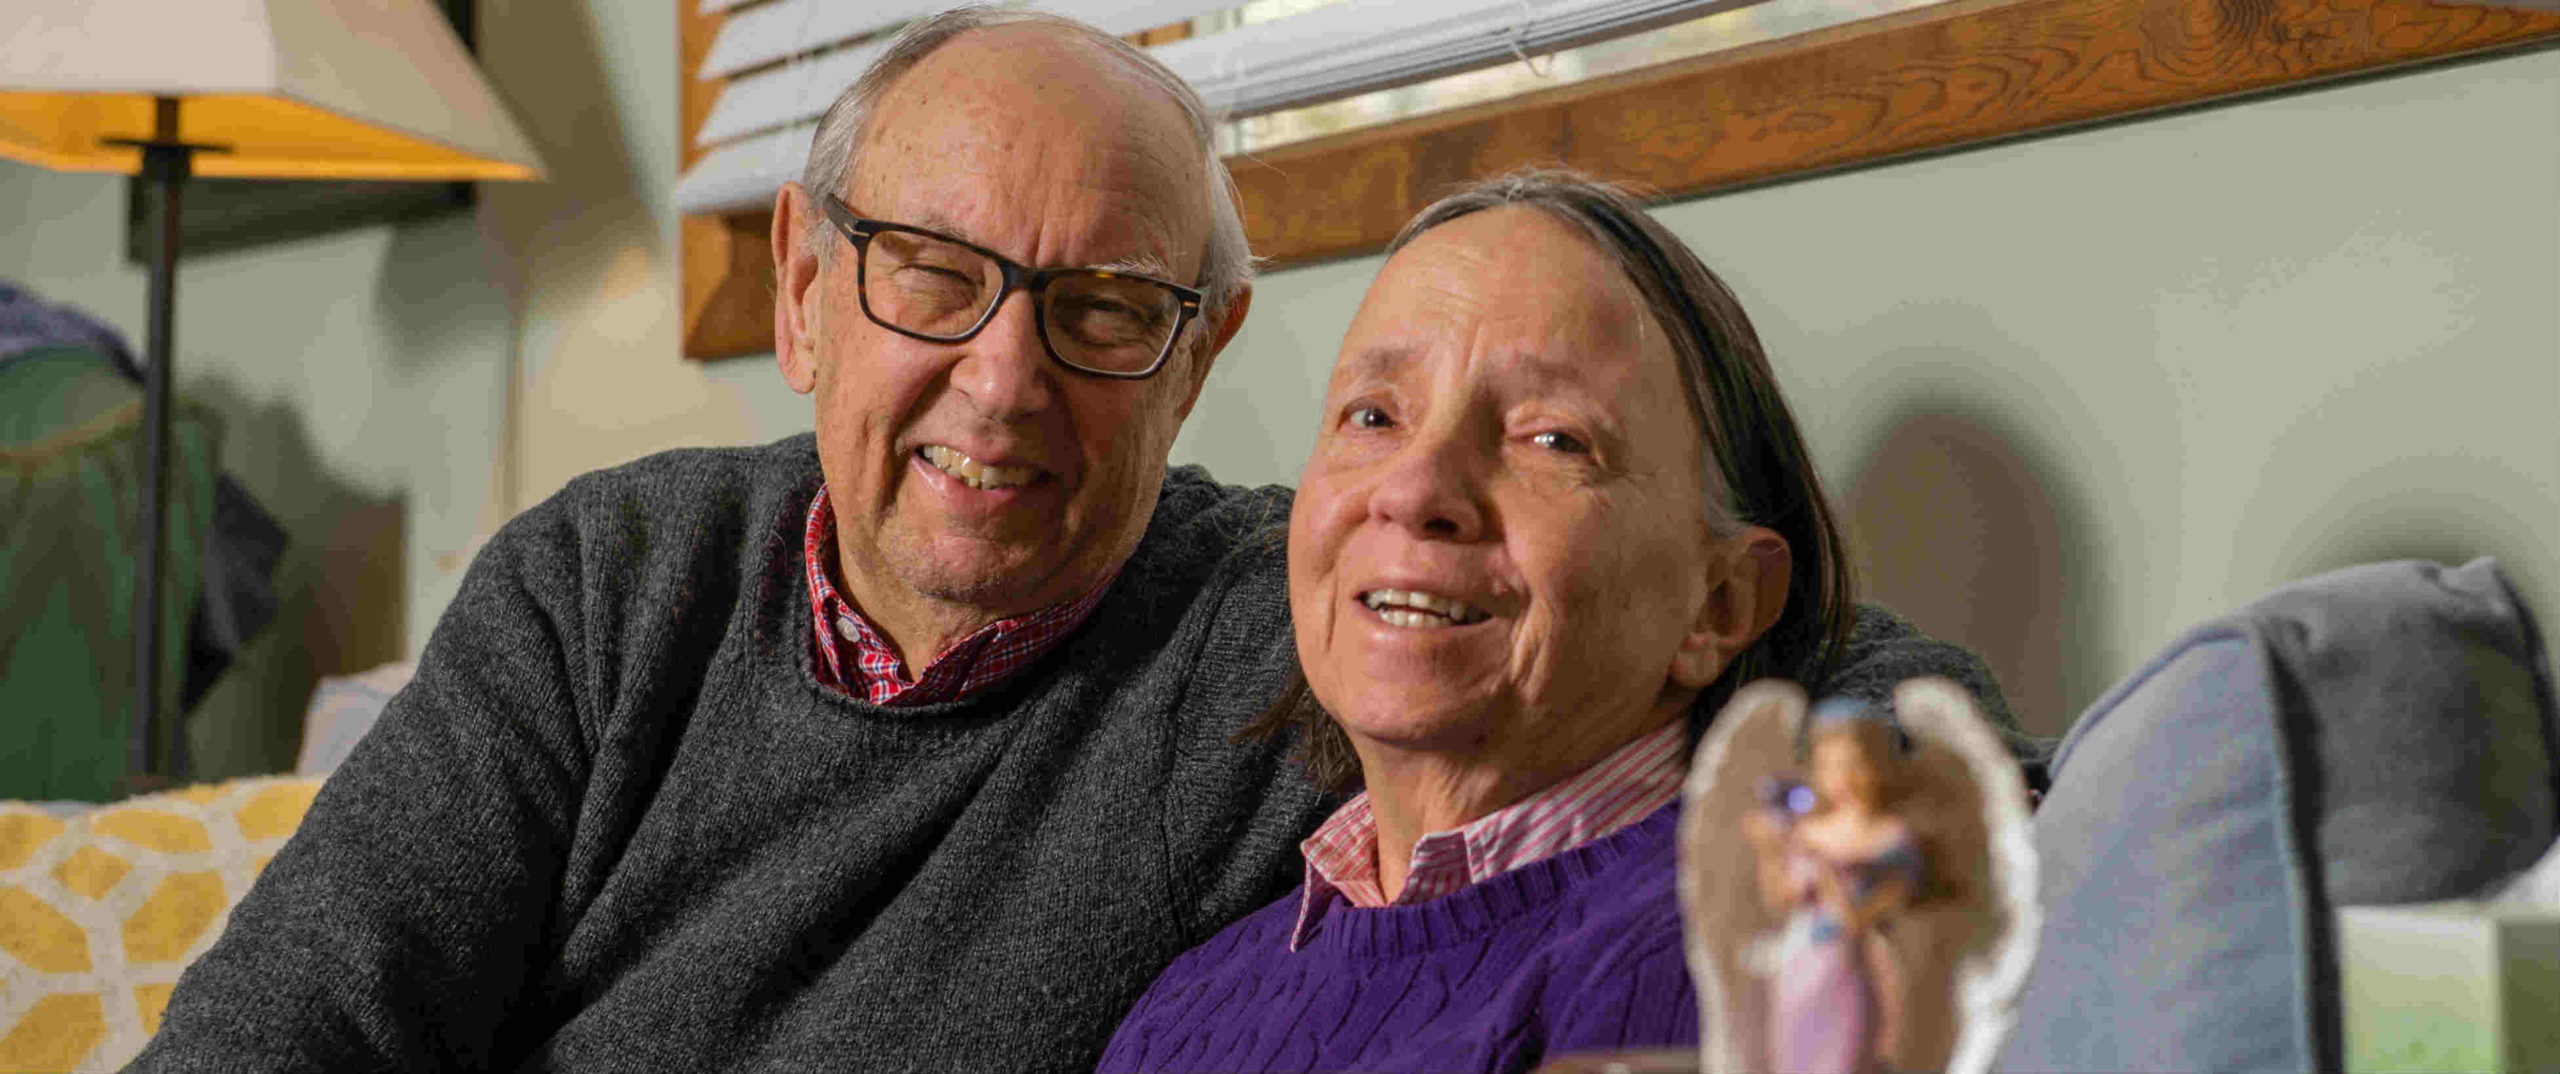 On another St. Valentine’s Day, health struggle only strengthens bond of couple